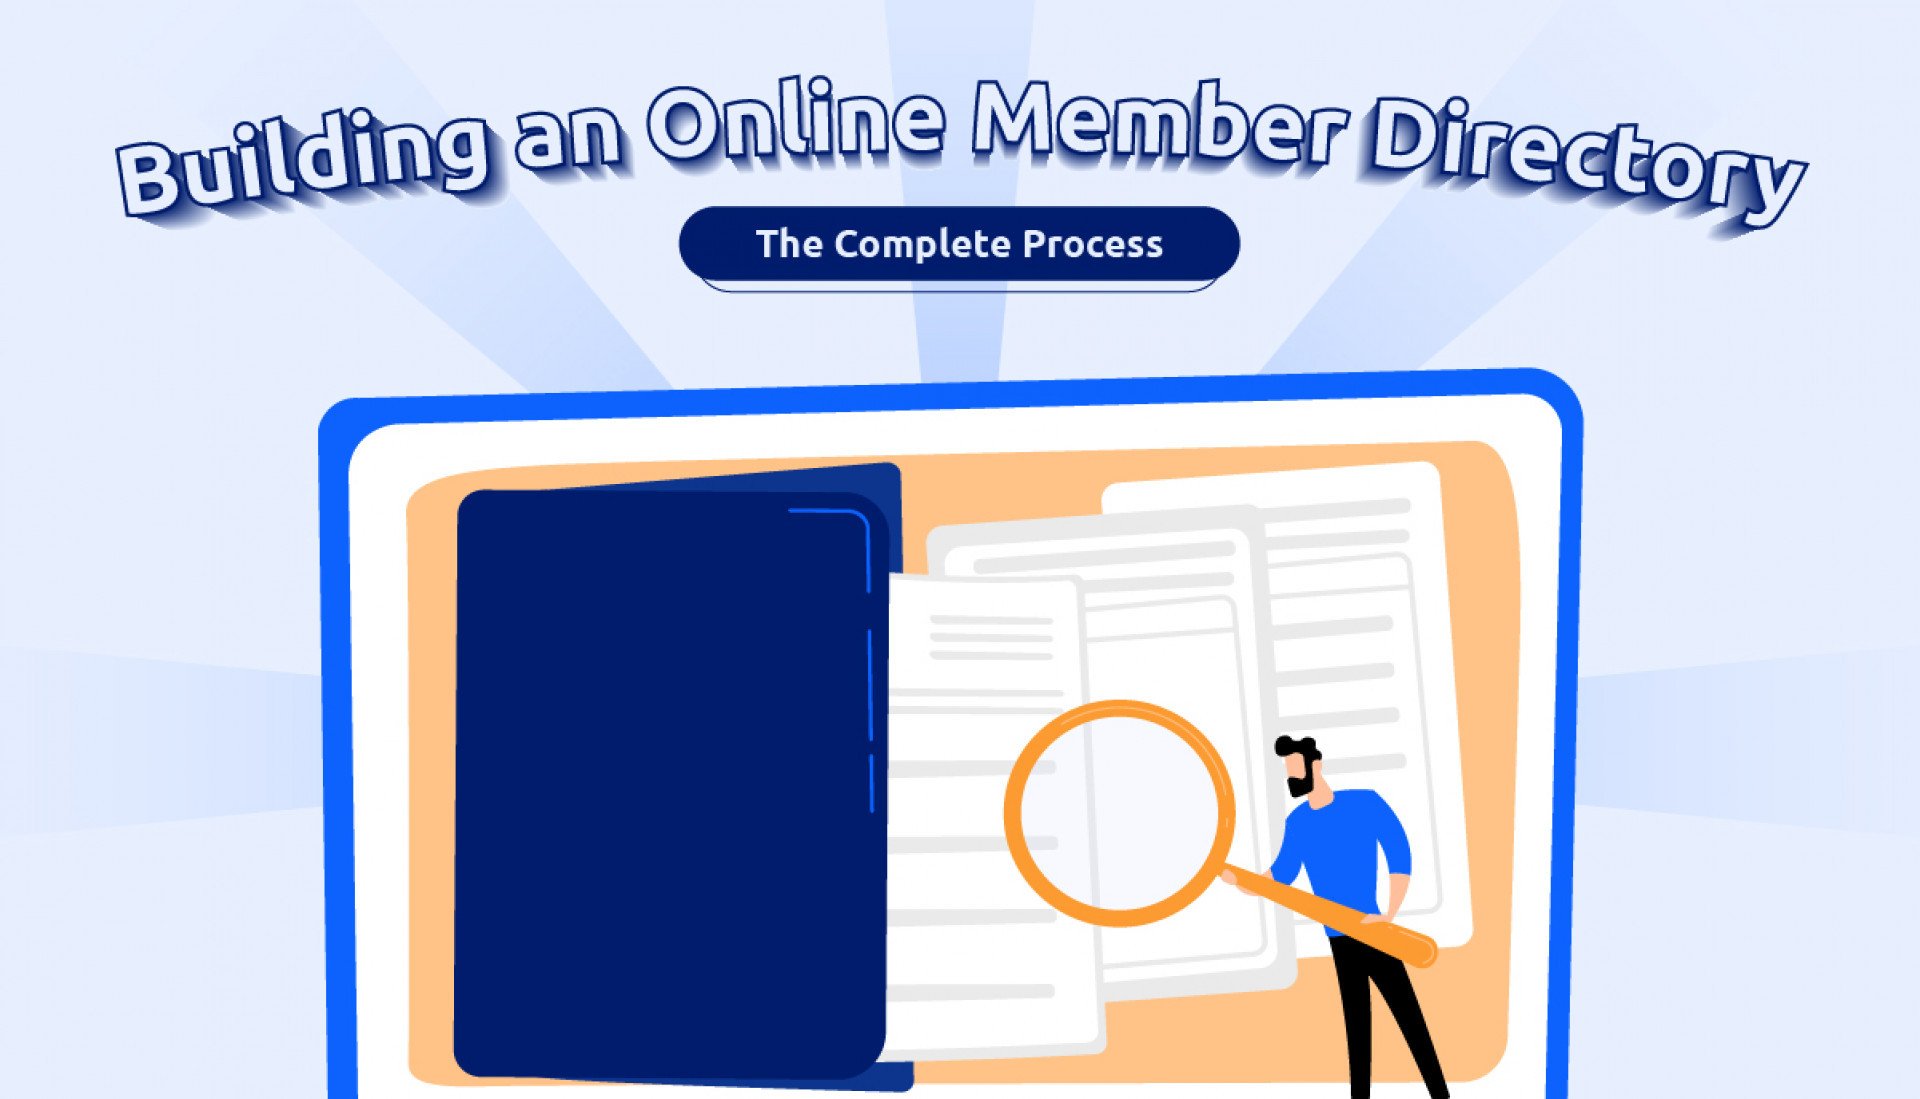 Building an Online Member Directory: The Complete Process